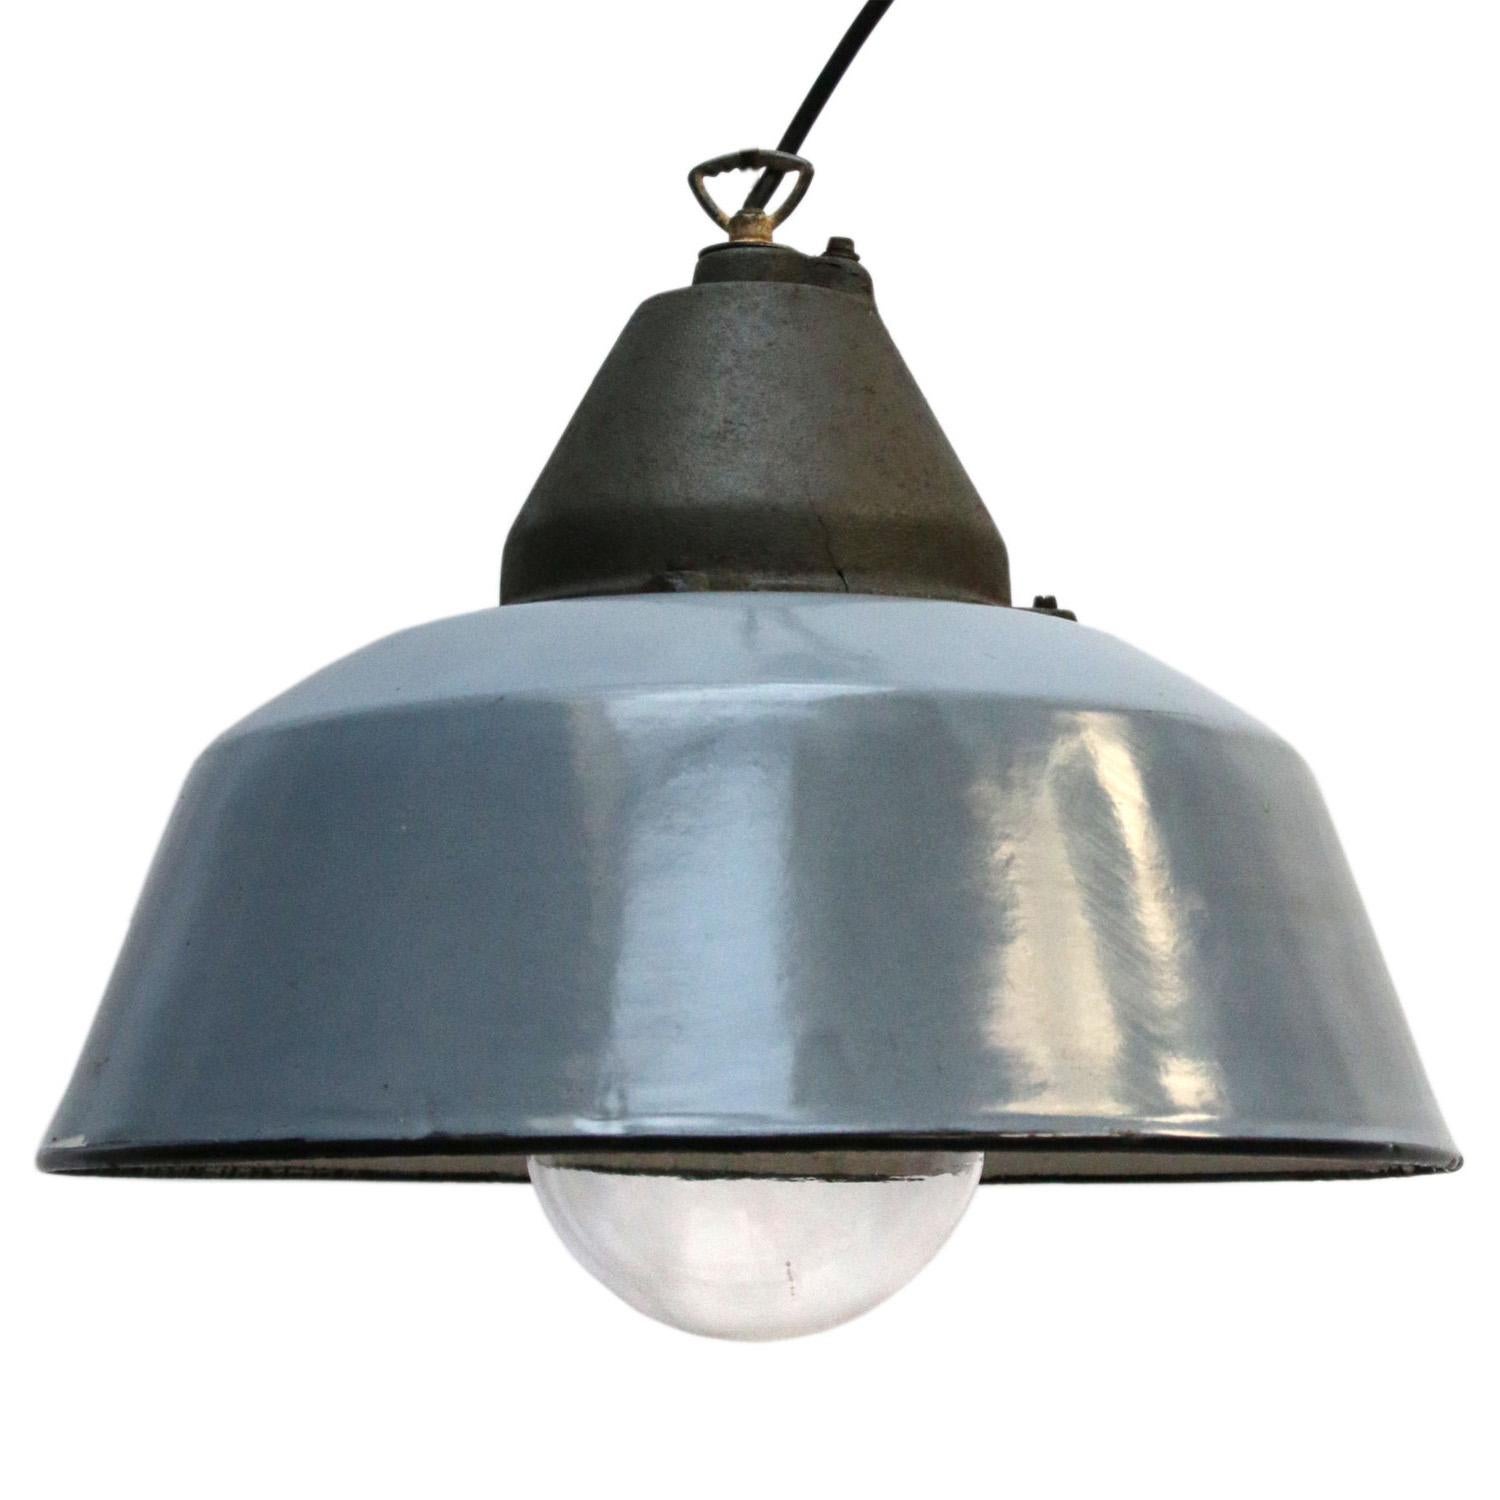 Factory hanging lamp. Gray enamel. White interior.
Clear glass. Cast iron top.

Weight: 5.5 kg / 12.1 lb

Priced per individual item. All lamps have been made suitable by international standards for incandescent light bulbs, energy-efficient